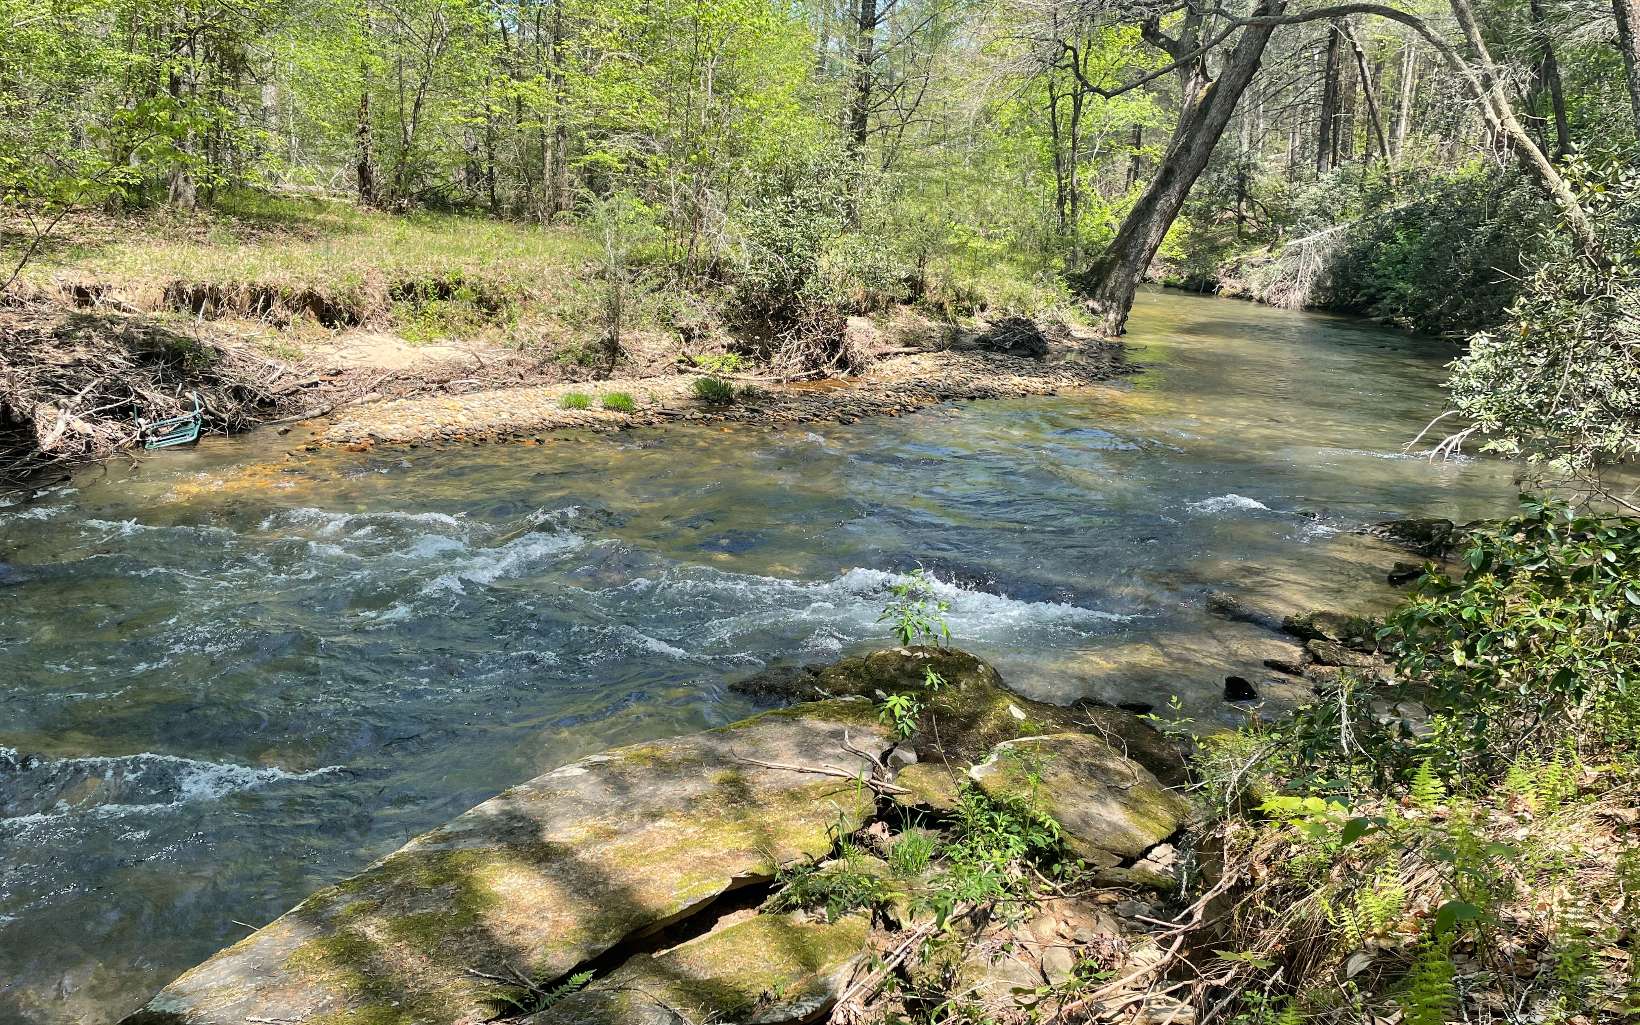 Rapids and white water along the stretch of frontage on Cooper's Creek trout waters! 3 Acres with long frontage on Cooper's Creek and amazing views! Underground utilities including community water system. Driveway to homesite roughed in but needs TLC. Located in the community of The Retreat At Cooper's Creek. Restricted, non-rental neighborhood. Come and spend your days listening to the sweet sounds of rippling waters and enjoy fly fishing!